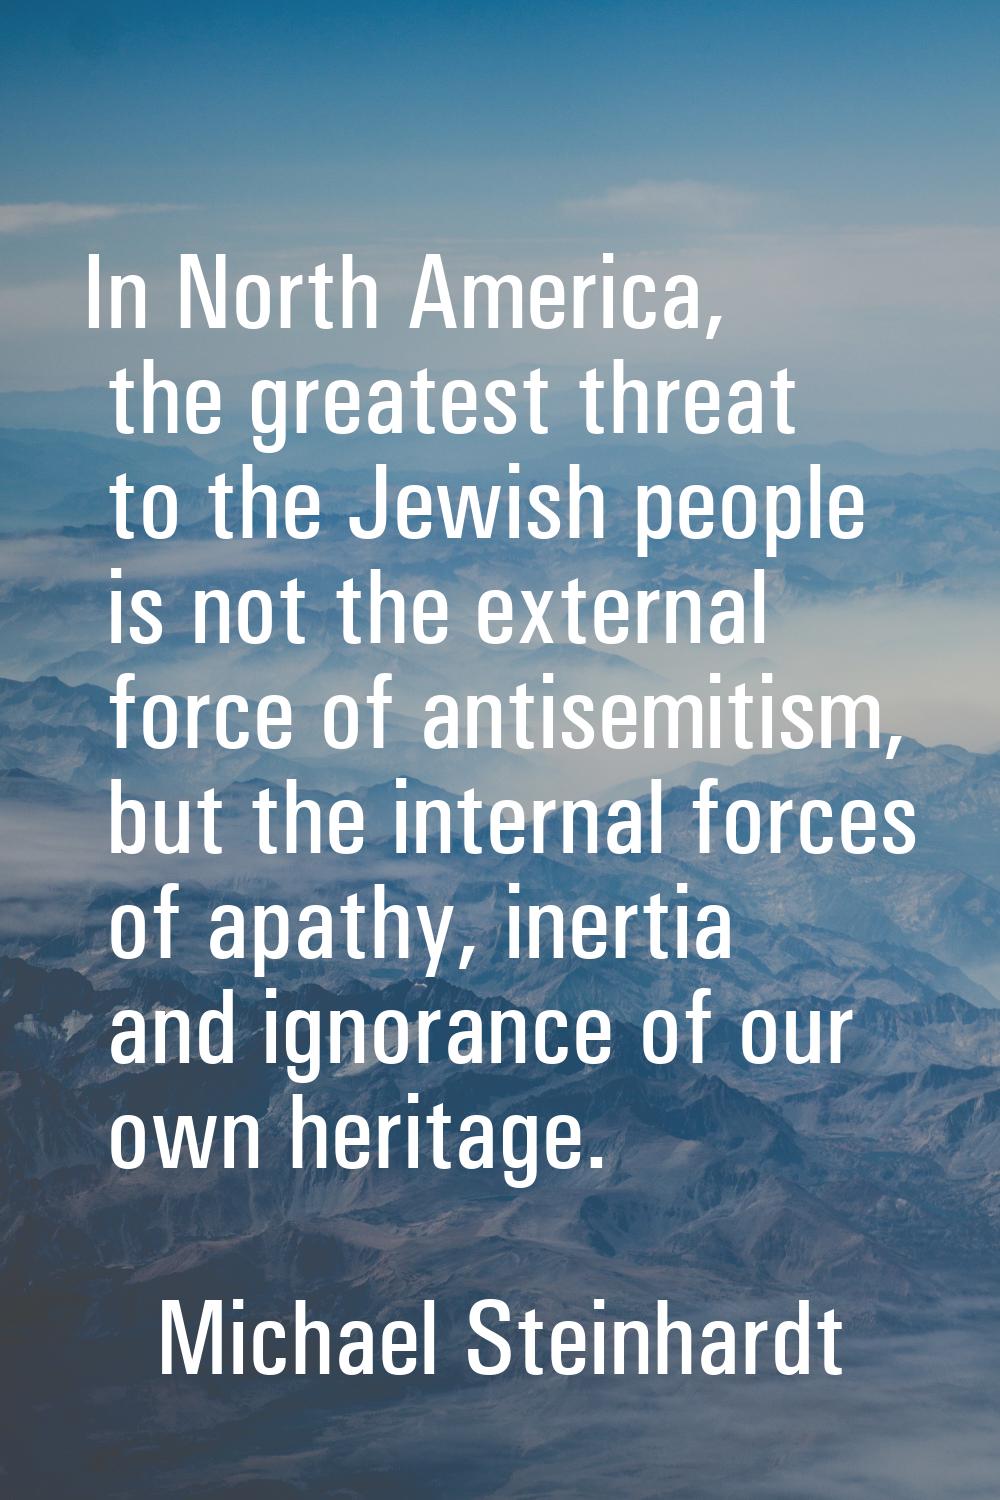 In North America, the greatest threat to the Jewish people is not the external force of antisemitis